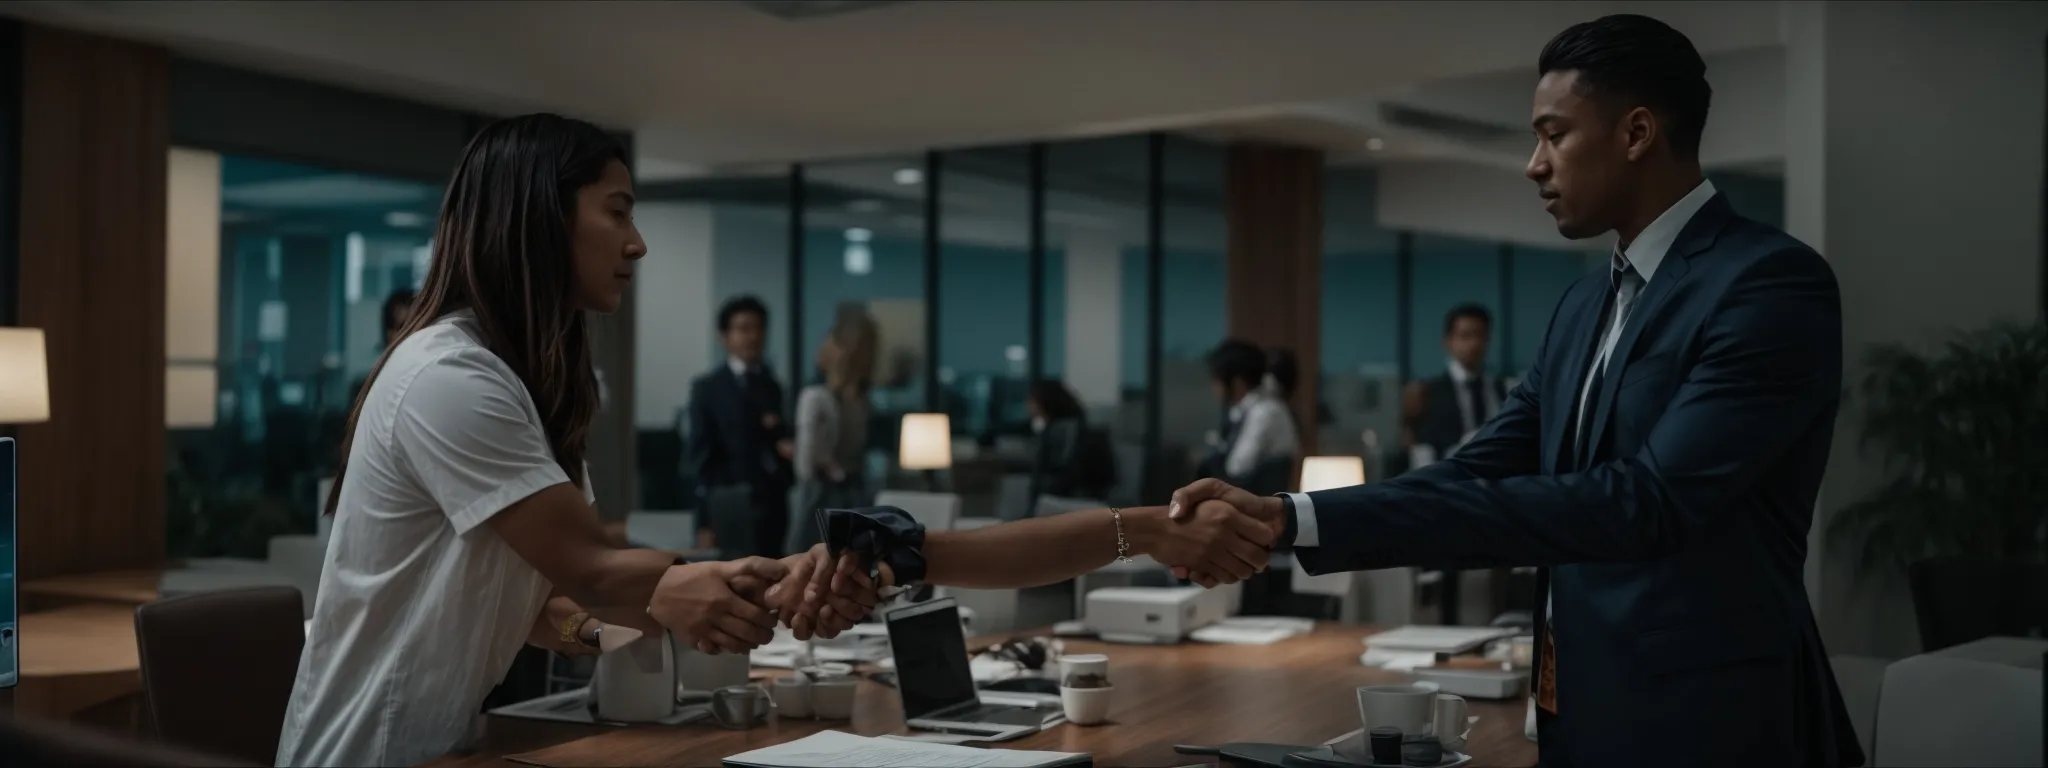 two professionals shaking hands across a table, solidifying a partnership, with a modern office surrounding suggesting a meeting of digital marketing minds.